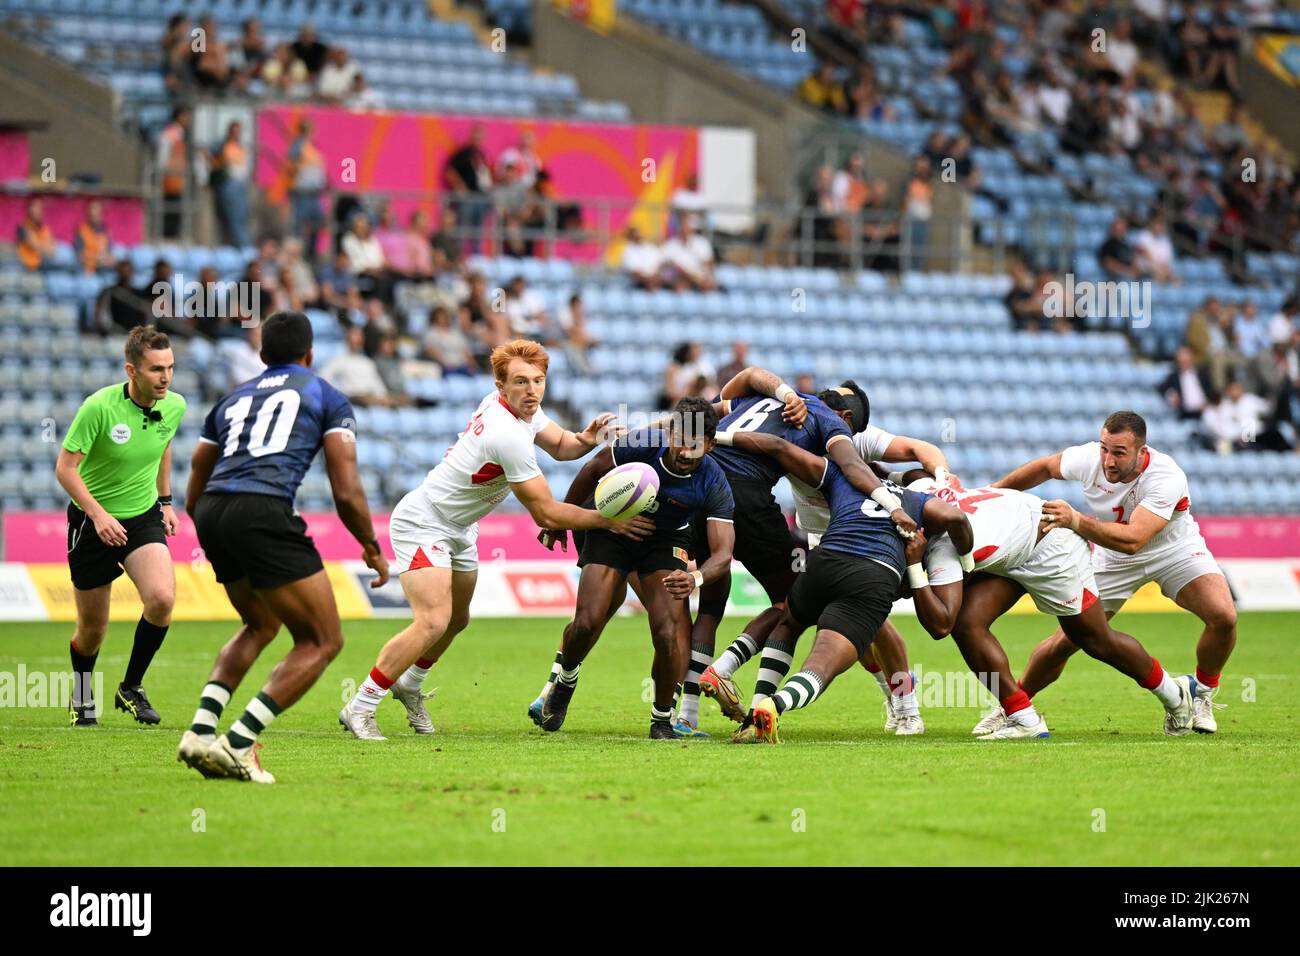 A scrum between England and Sri Lanka during the Rugby Sevens at the Commonwealth Games at Coventry Stadium on Friday 29th July 2022. Credit: MI News & Sport /Alamy Live News Stock Photo